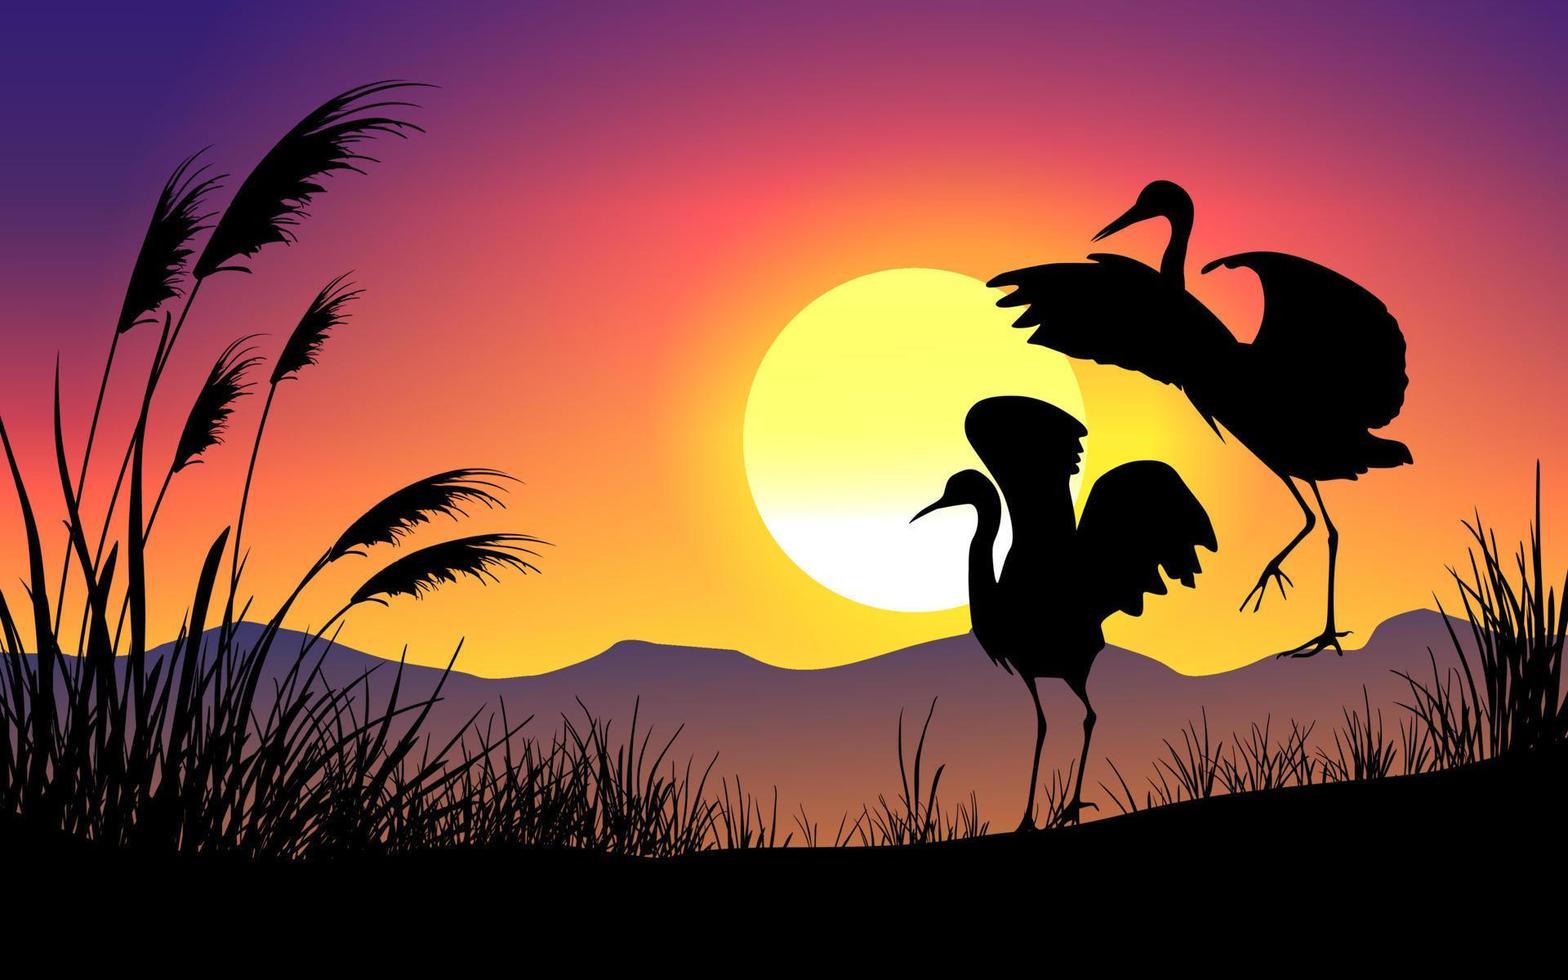 Birds silhouette on sunset nature background vector